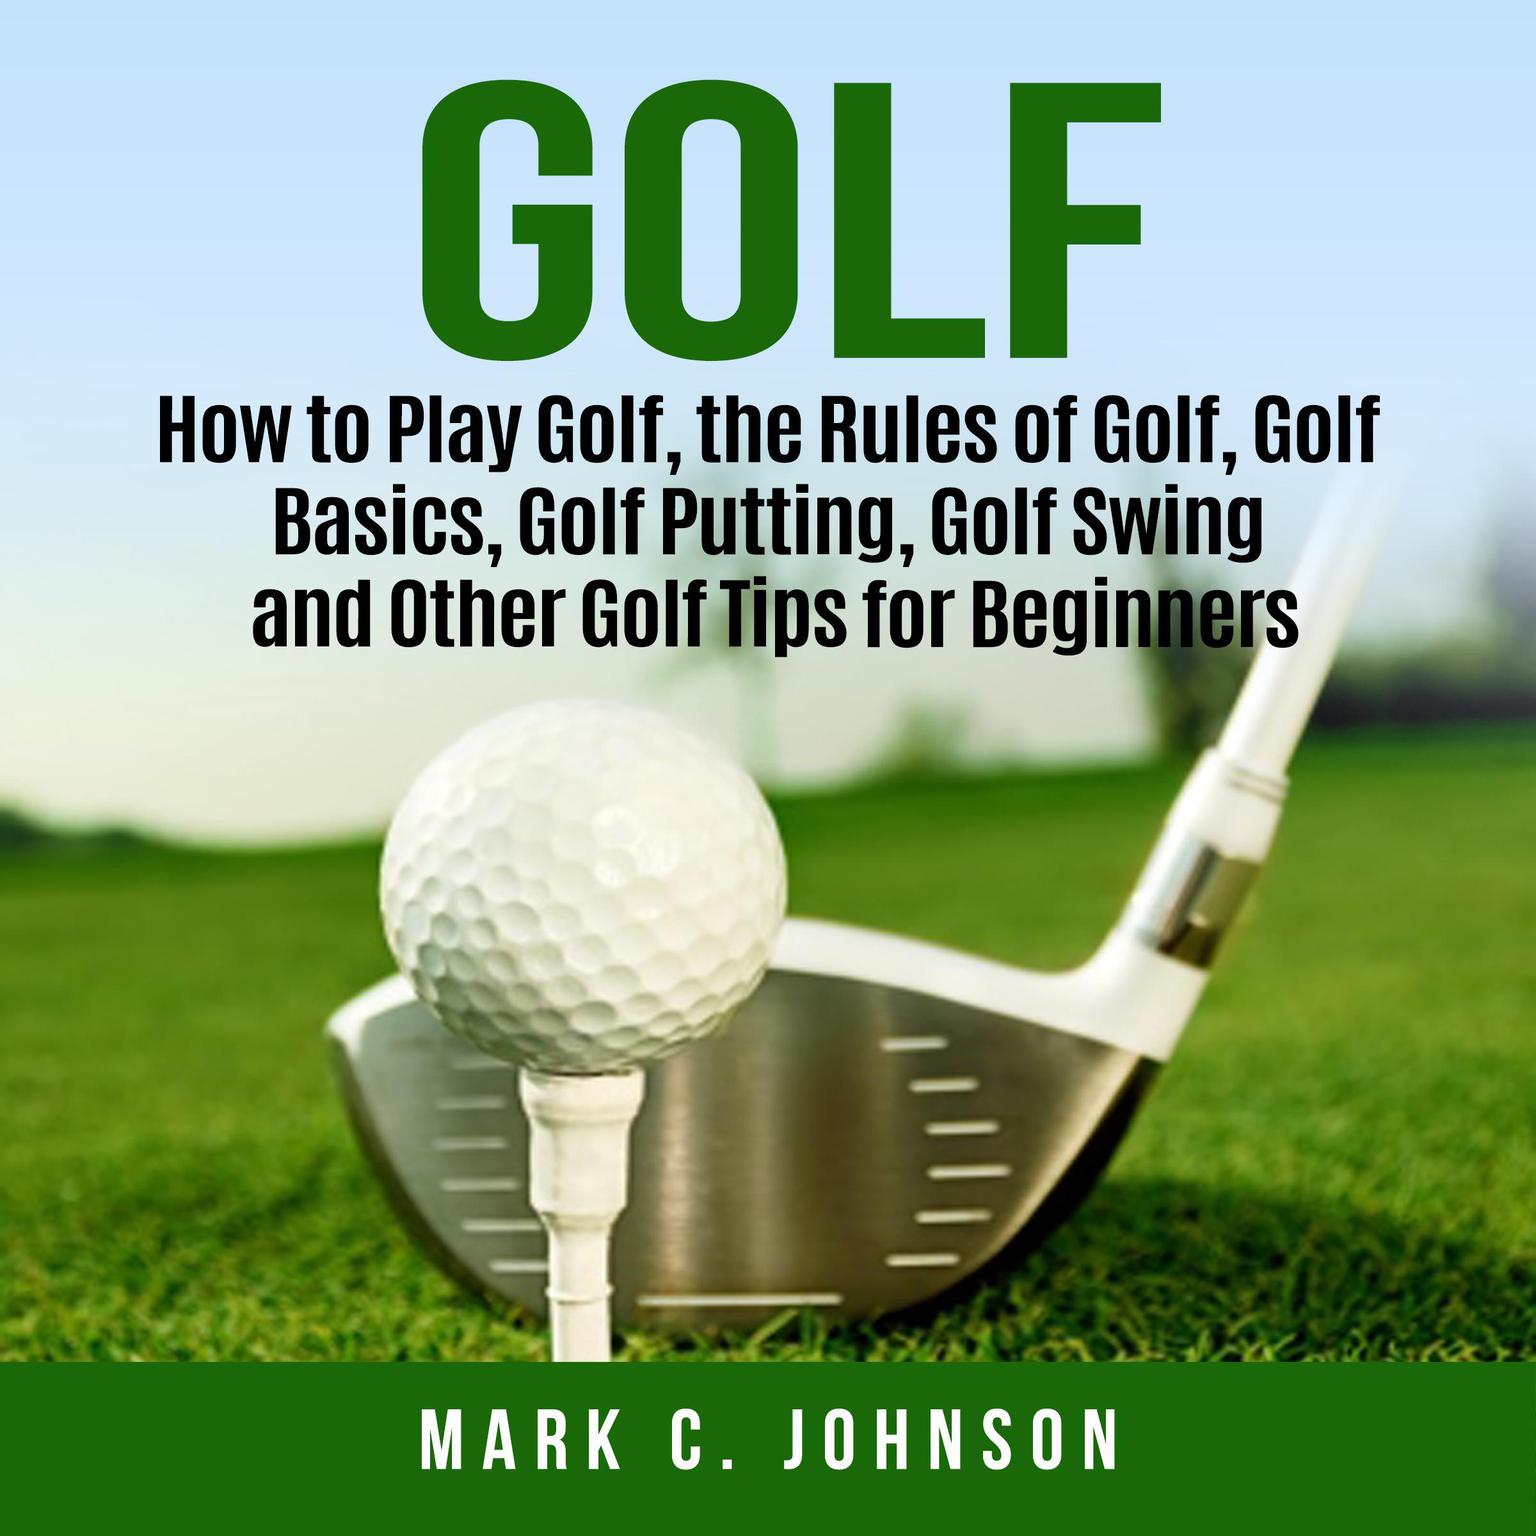 Golf: How to Play Golf, the Rules of Golf, Golf Basics, Golf Putting, Golf Swing and Other Golf Tips for Beginners Audiobook, by Mark C. Johnson